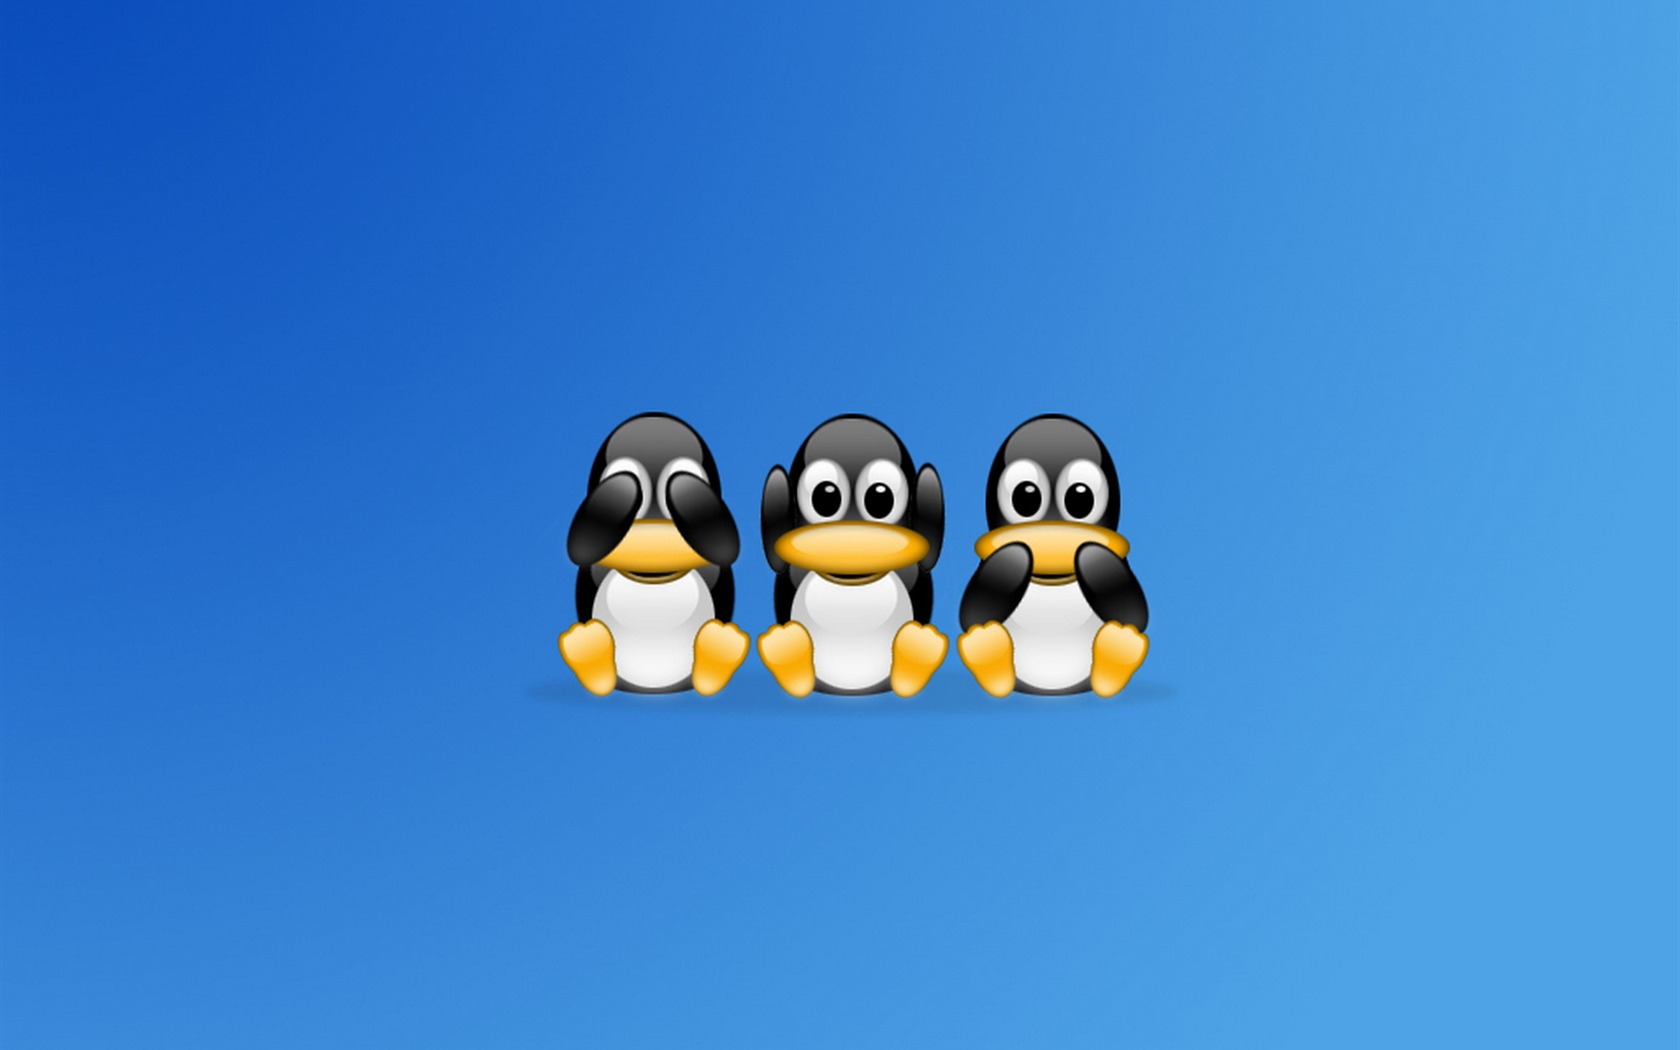 Linux tapety (3) #12 - 1680x1050